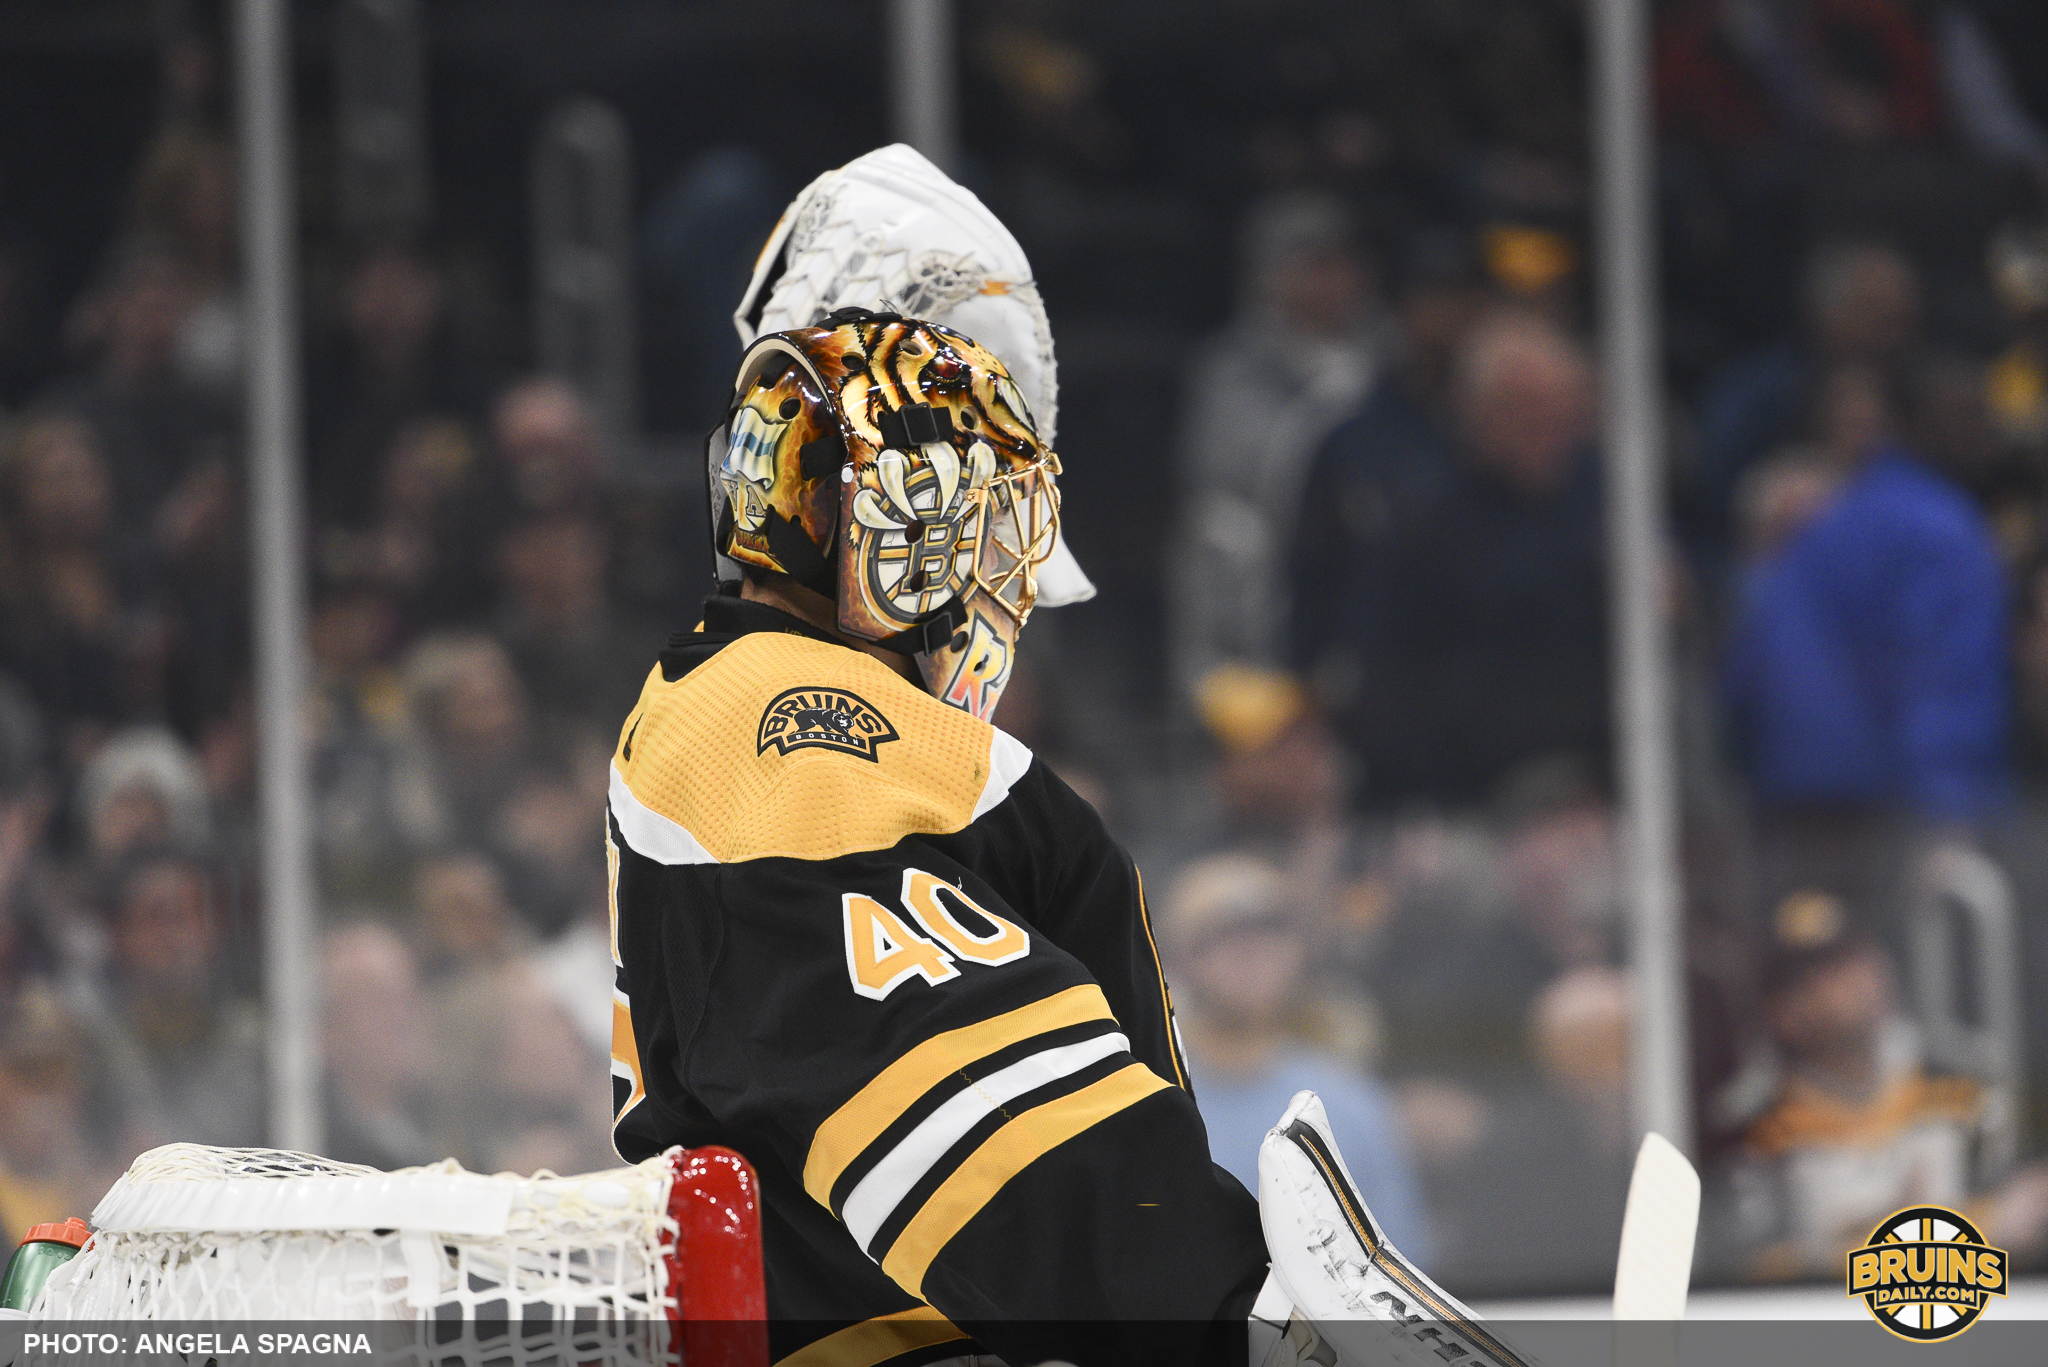 The Boston Bruins' Stanley Cup window is now closed